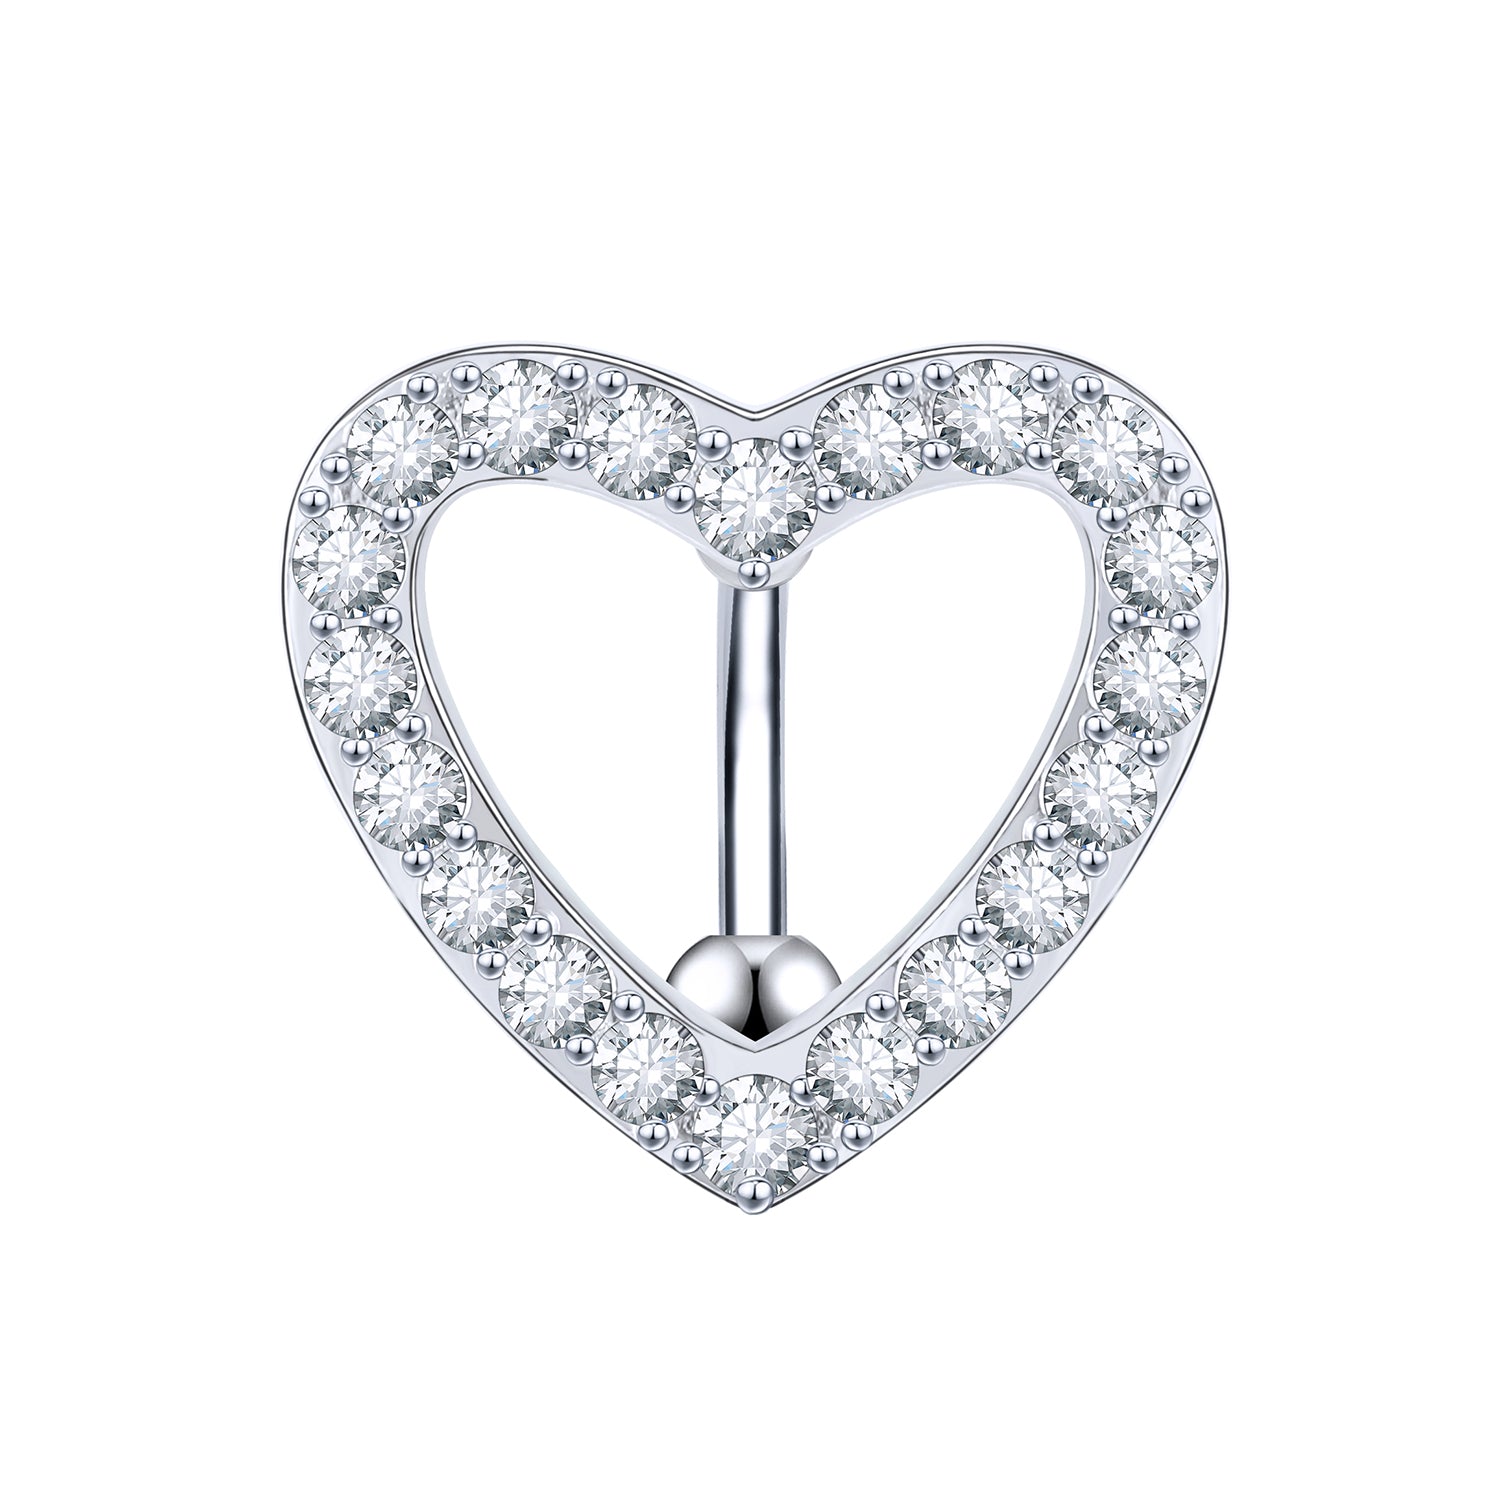 14g-heart-belly-button-rings-inset-cubic-zirconia-navel-piercing-jewelry